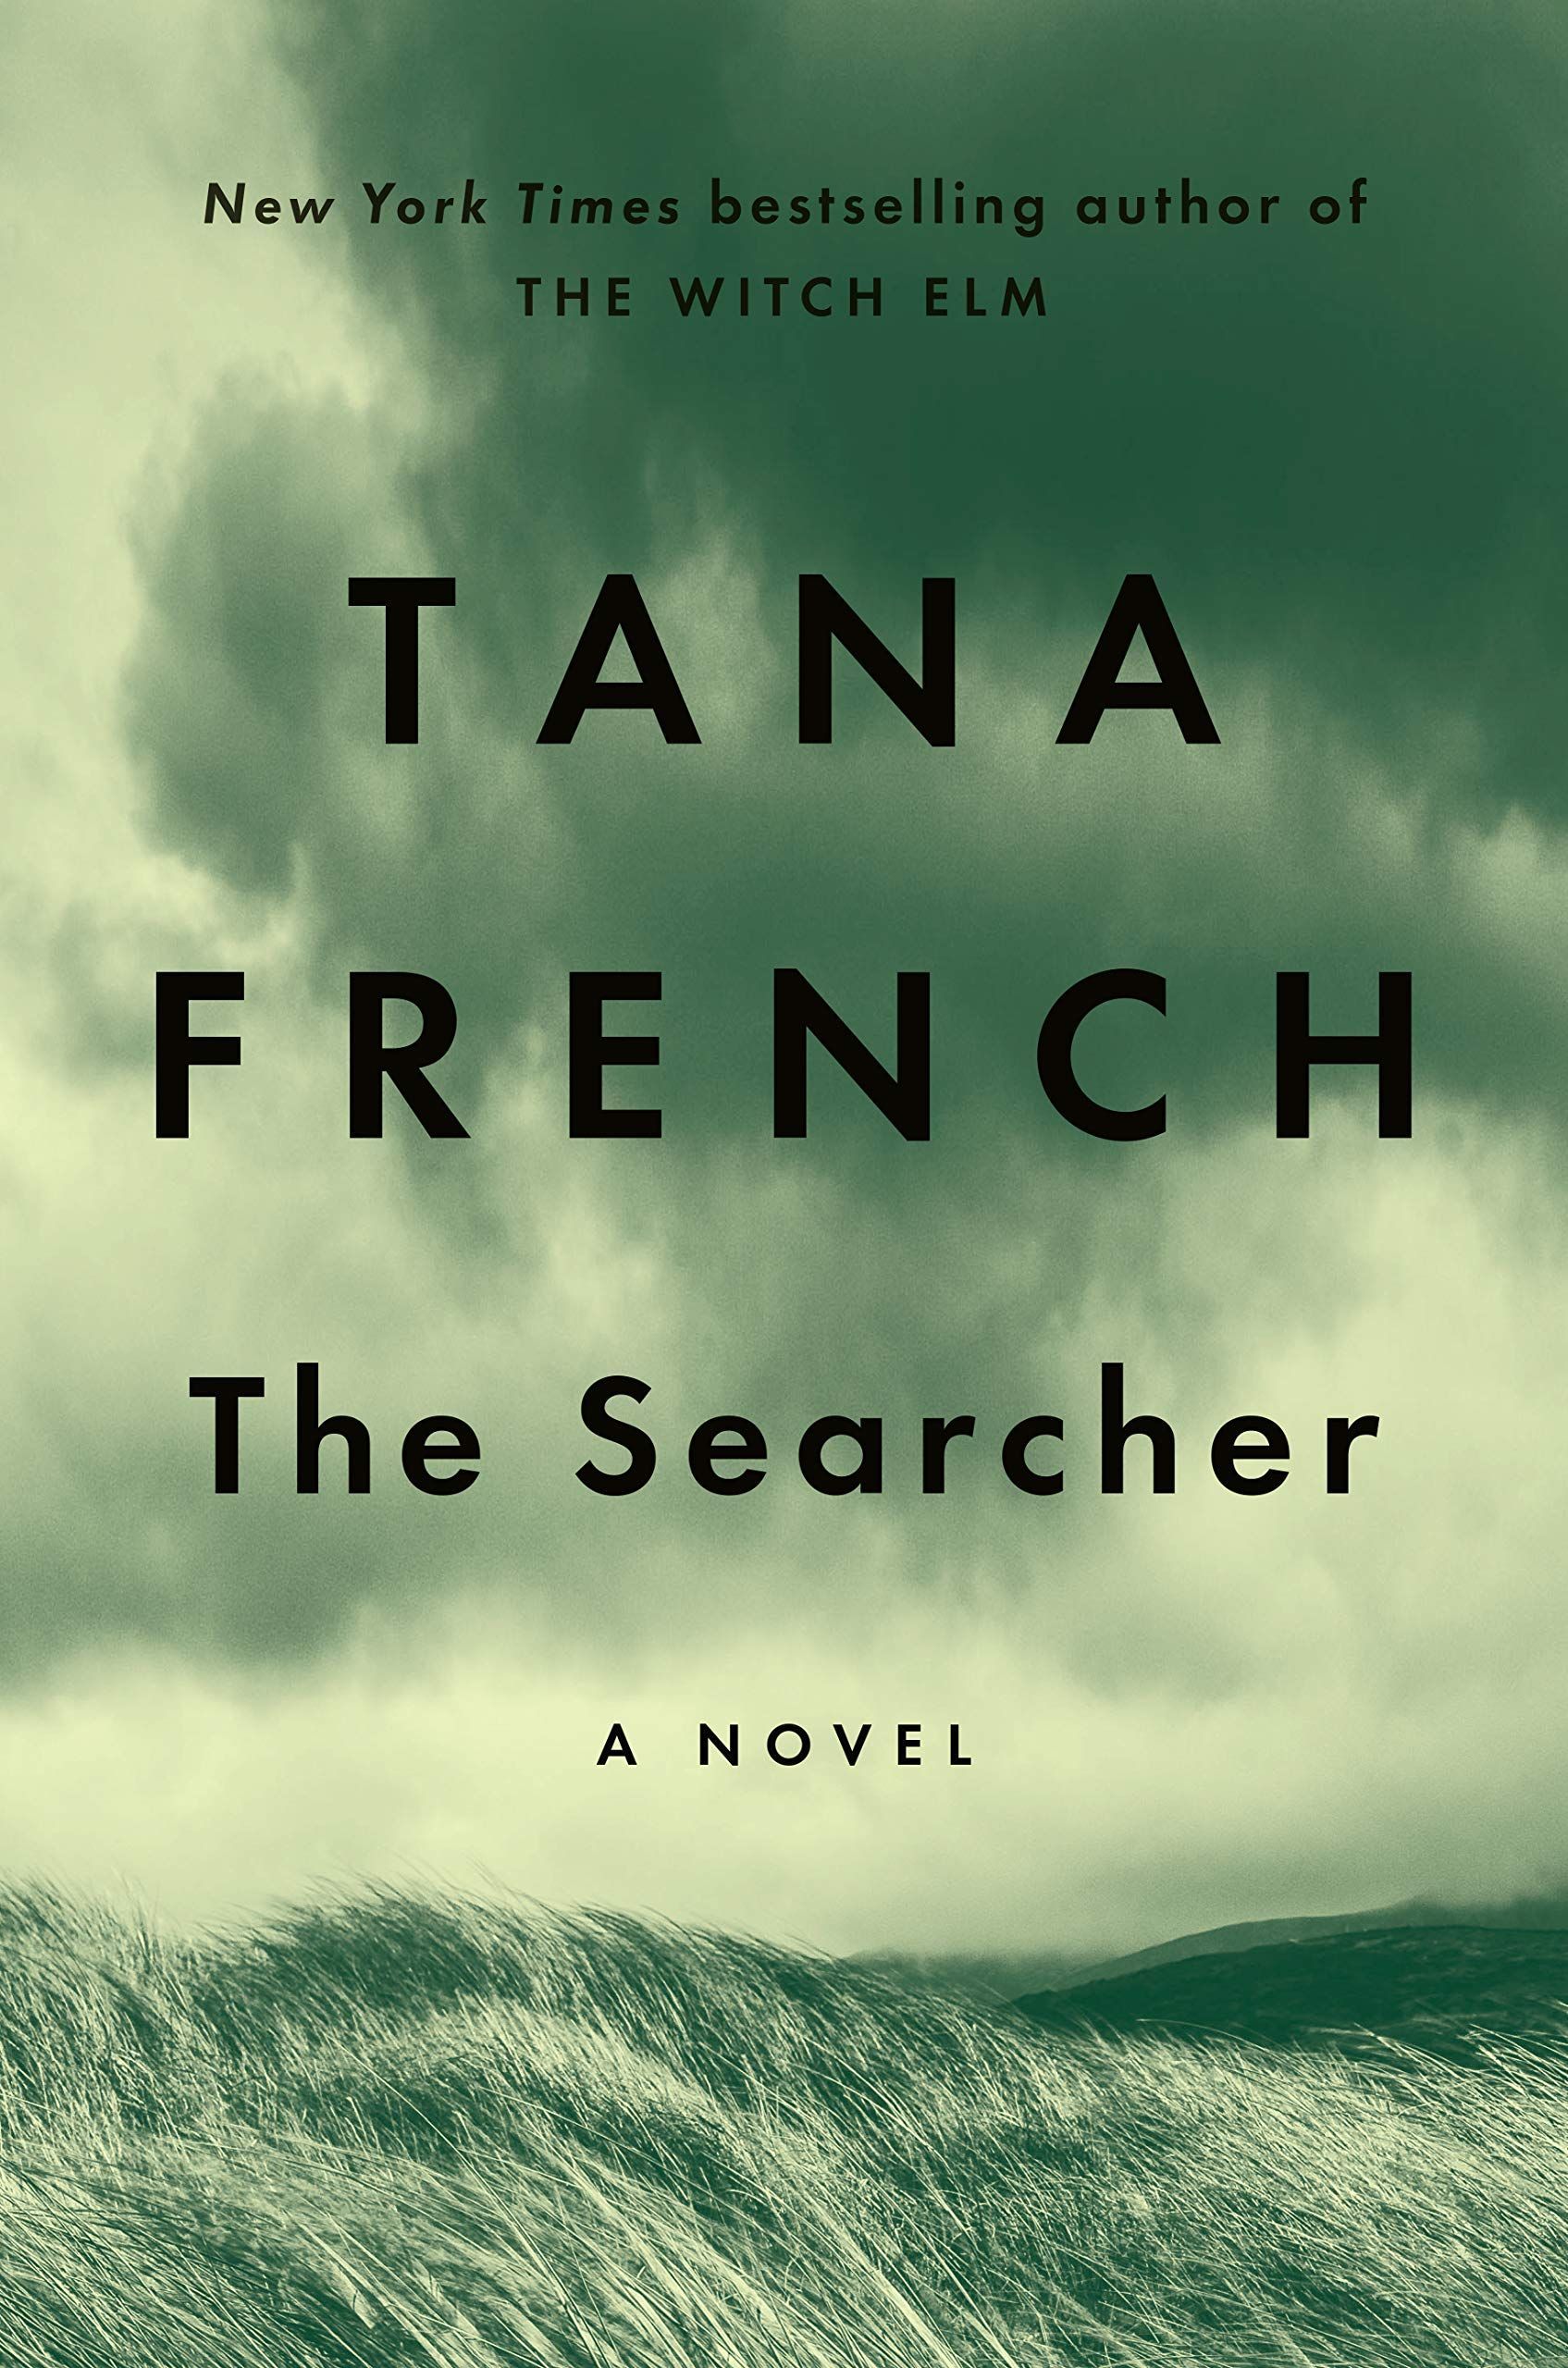 Closeness and Cruelty: On Tana French’s “The Searcher”